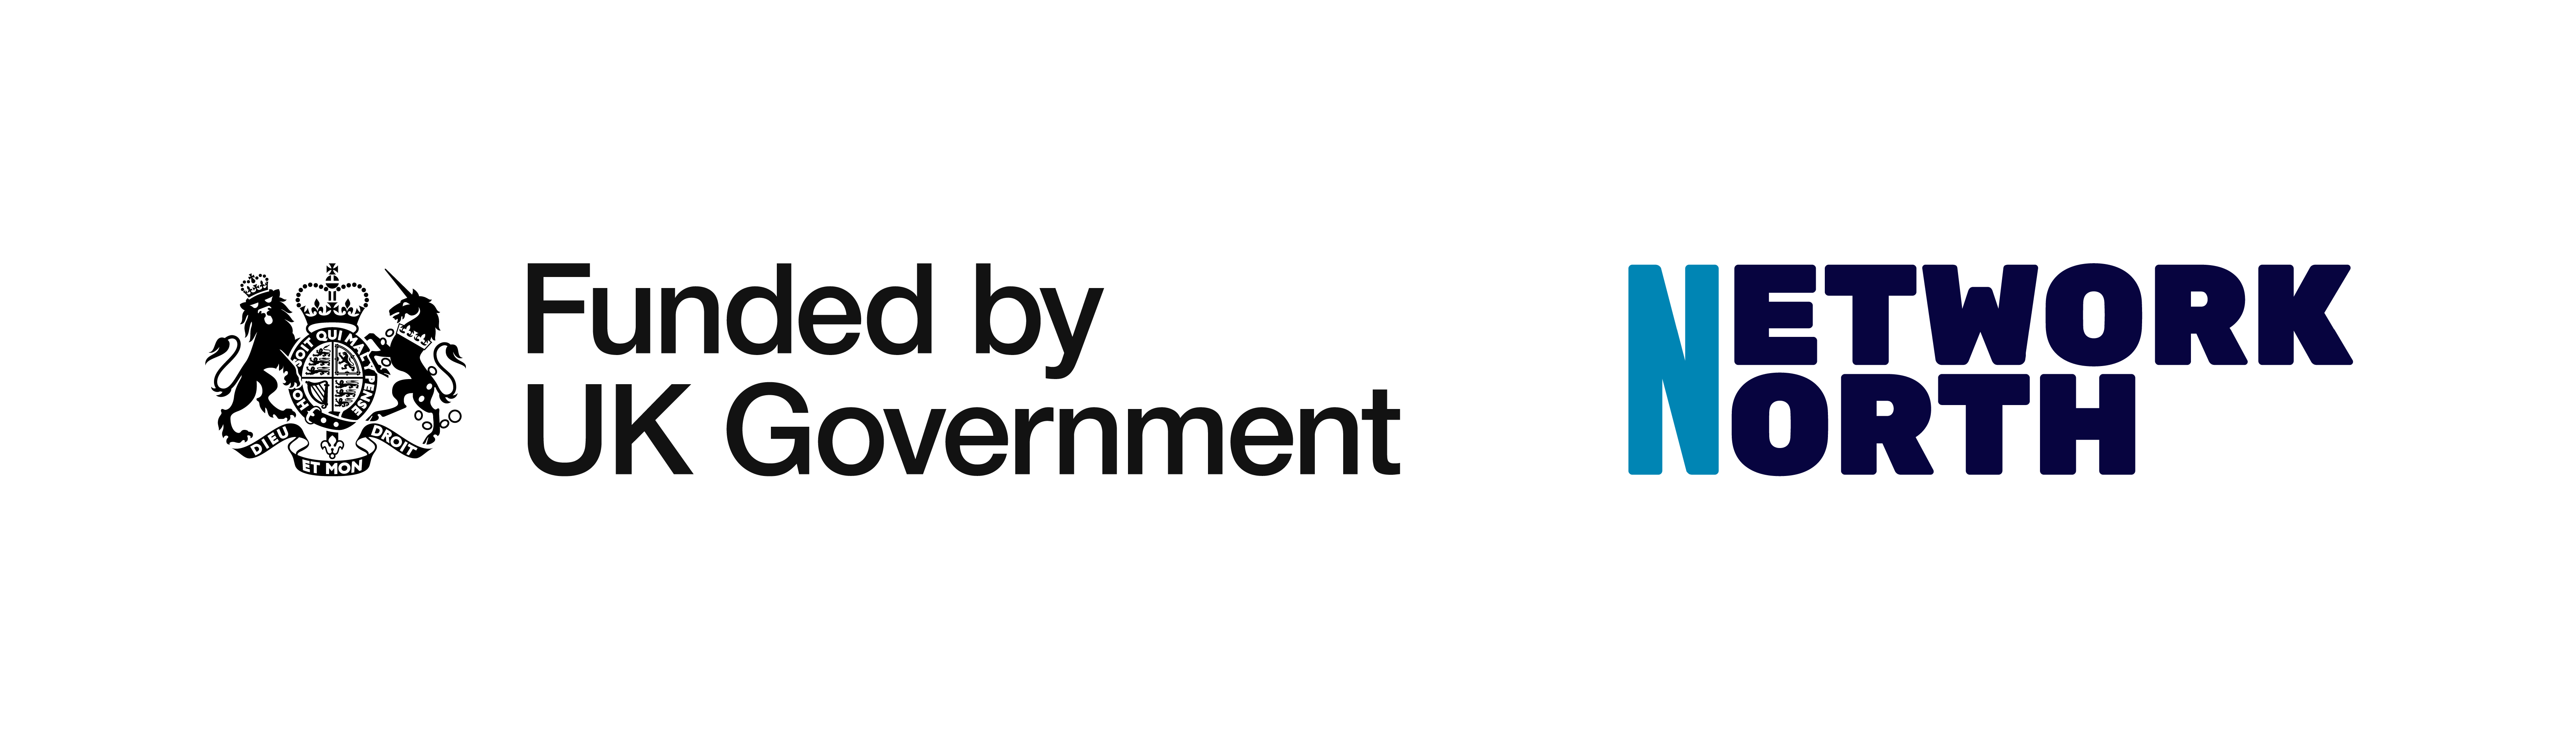 Funded by UK Gov logo and Network North text logo